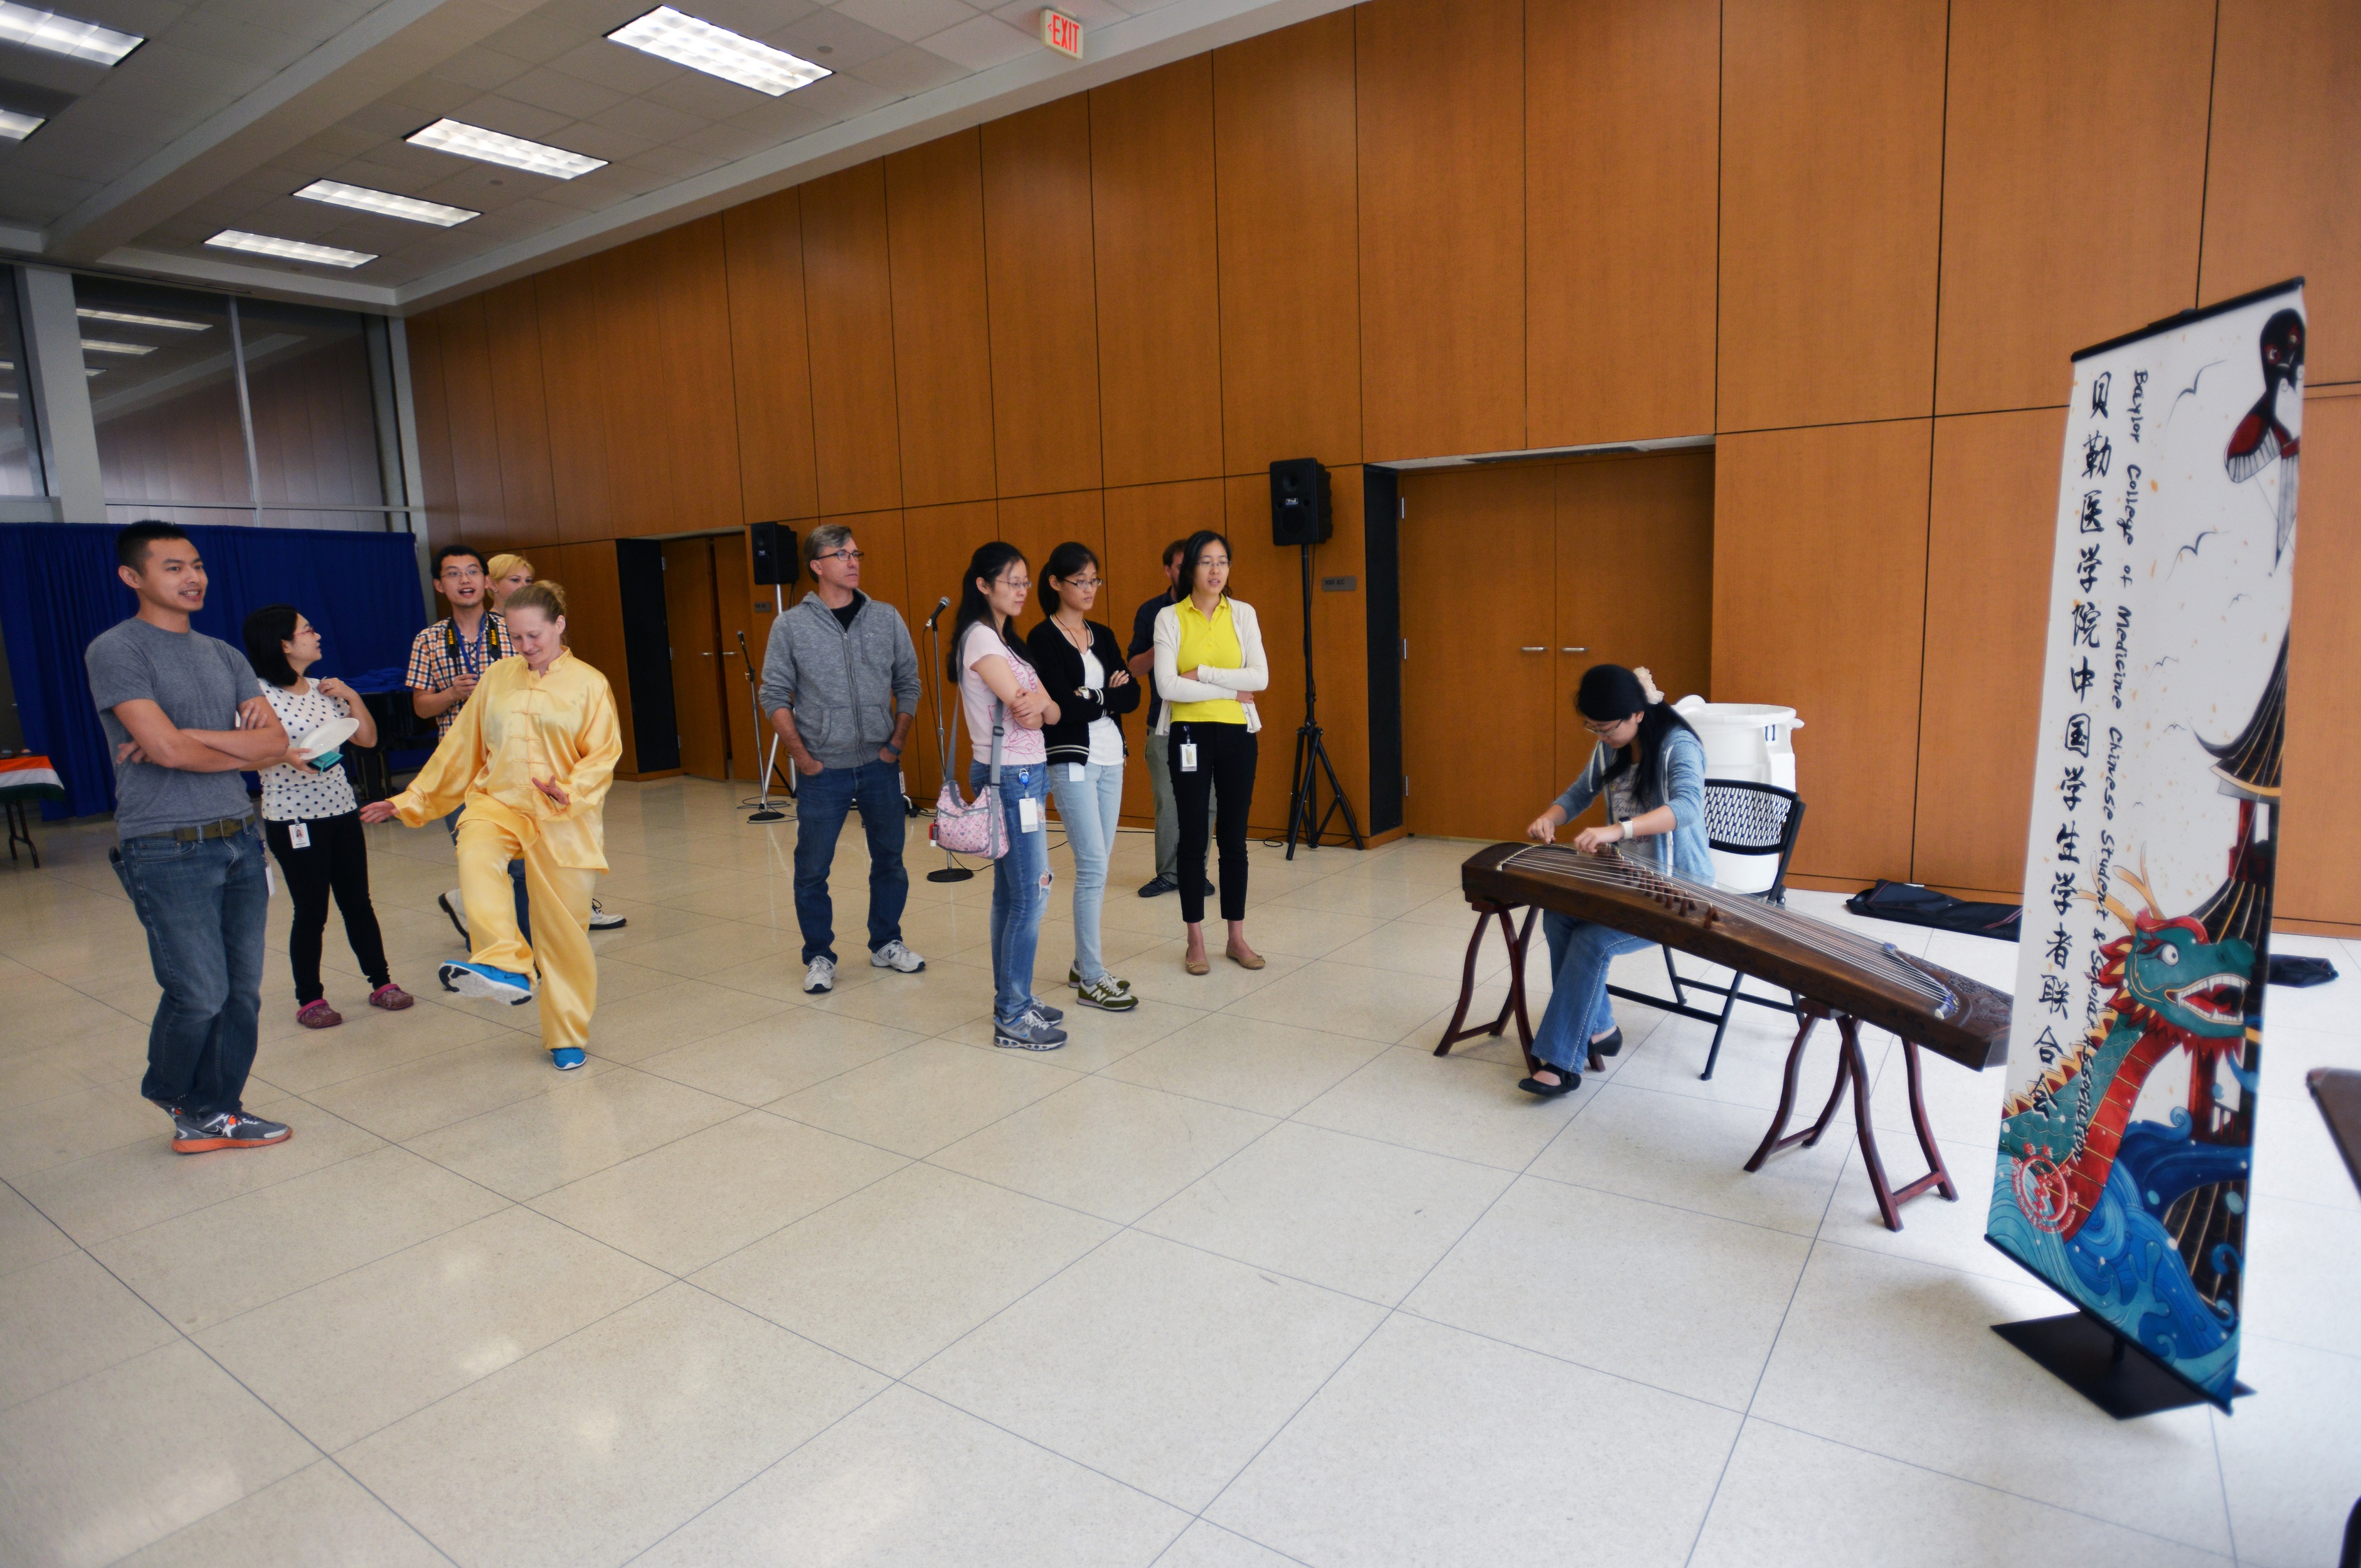 Students playing music for attendees.